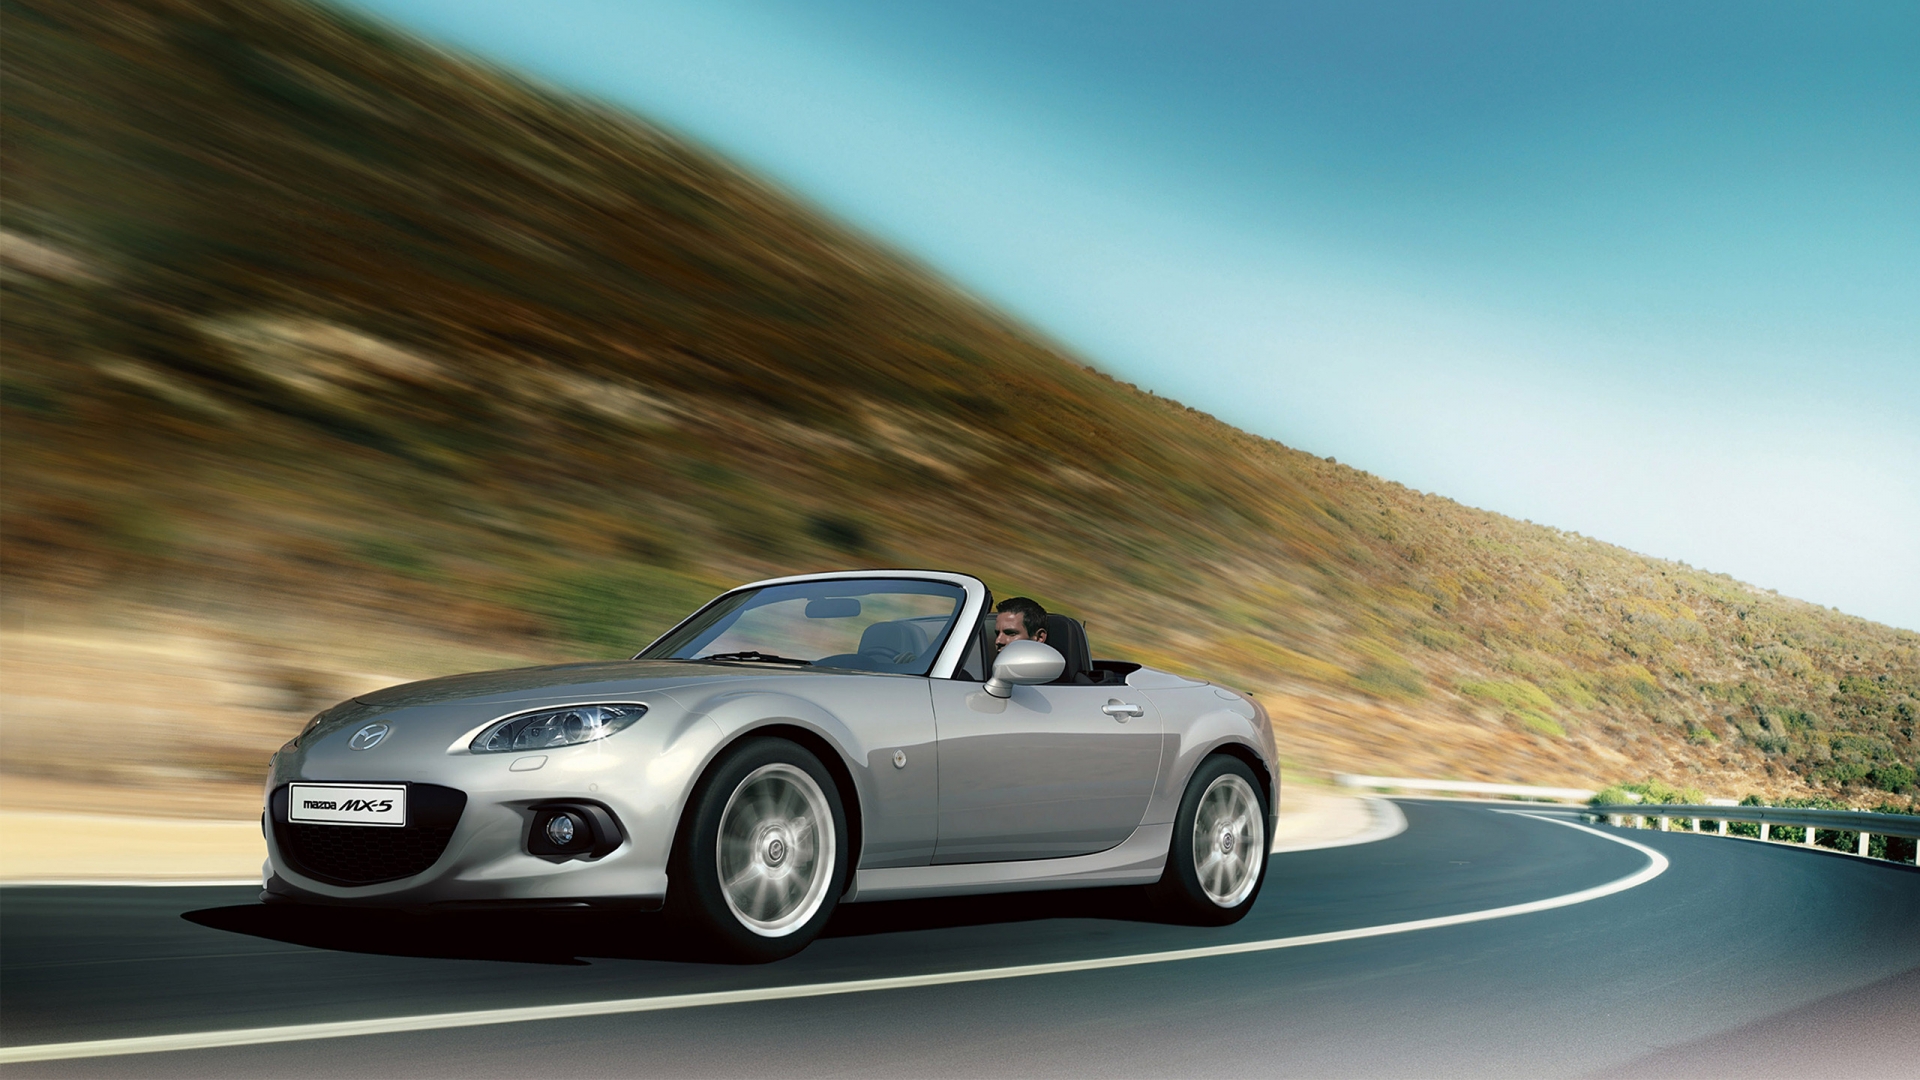 MX 5 Mazda Roadster Speed for 1920 x 1080 HDTV 1080p resolution